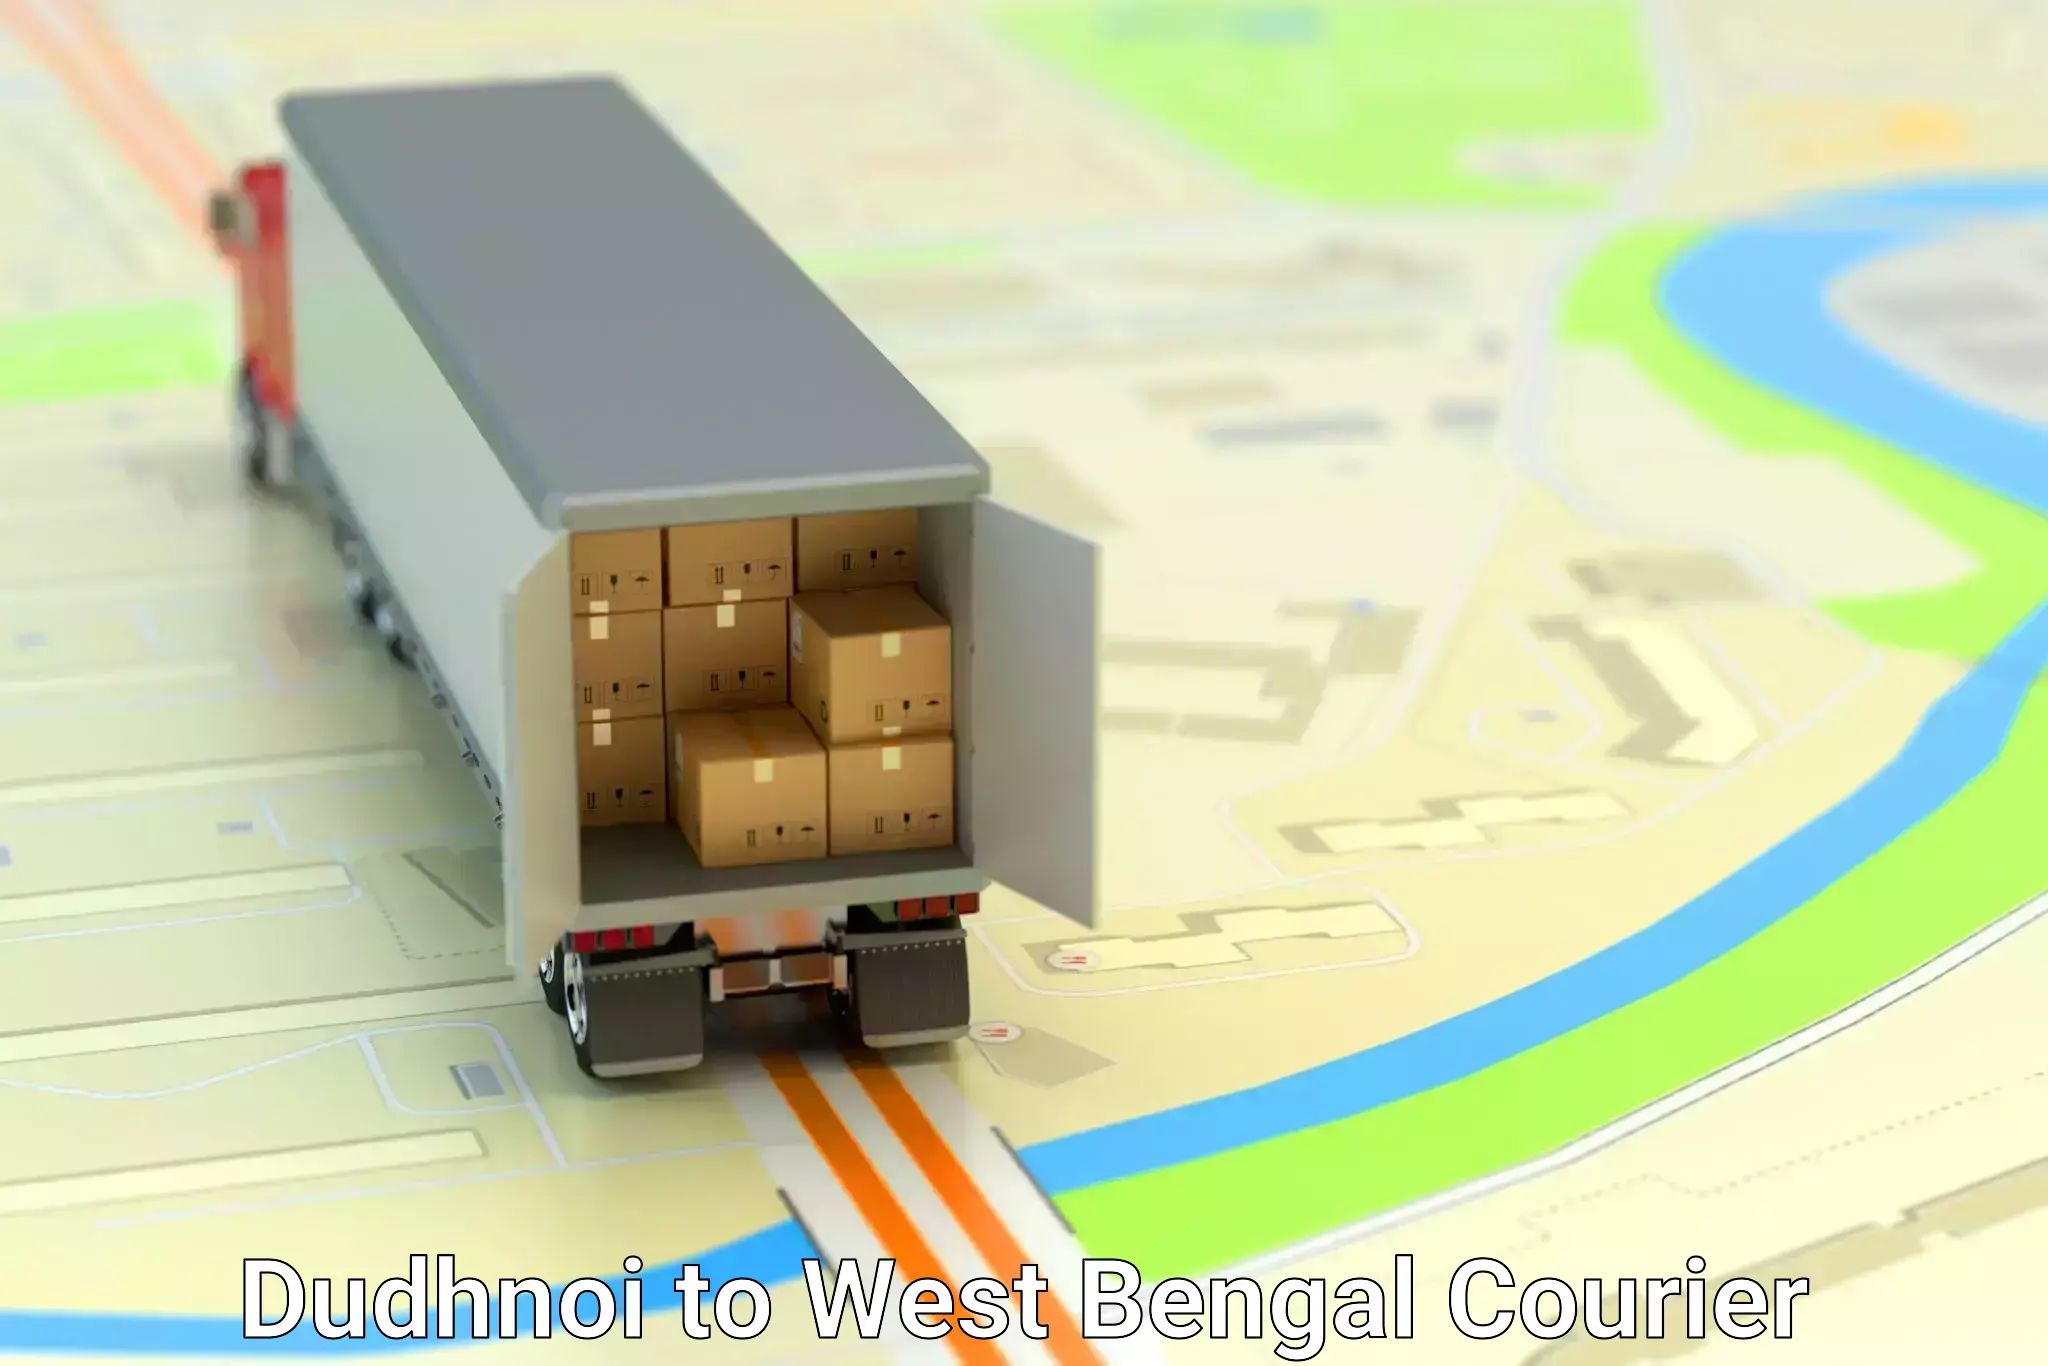 Specialized shipment handling Dudhnoi to West Bengal